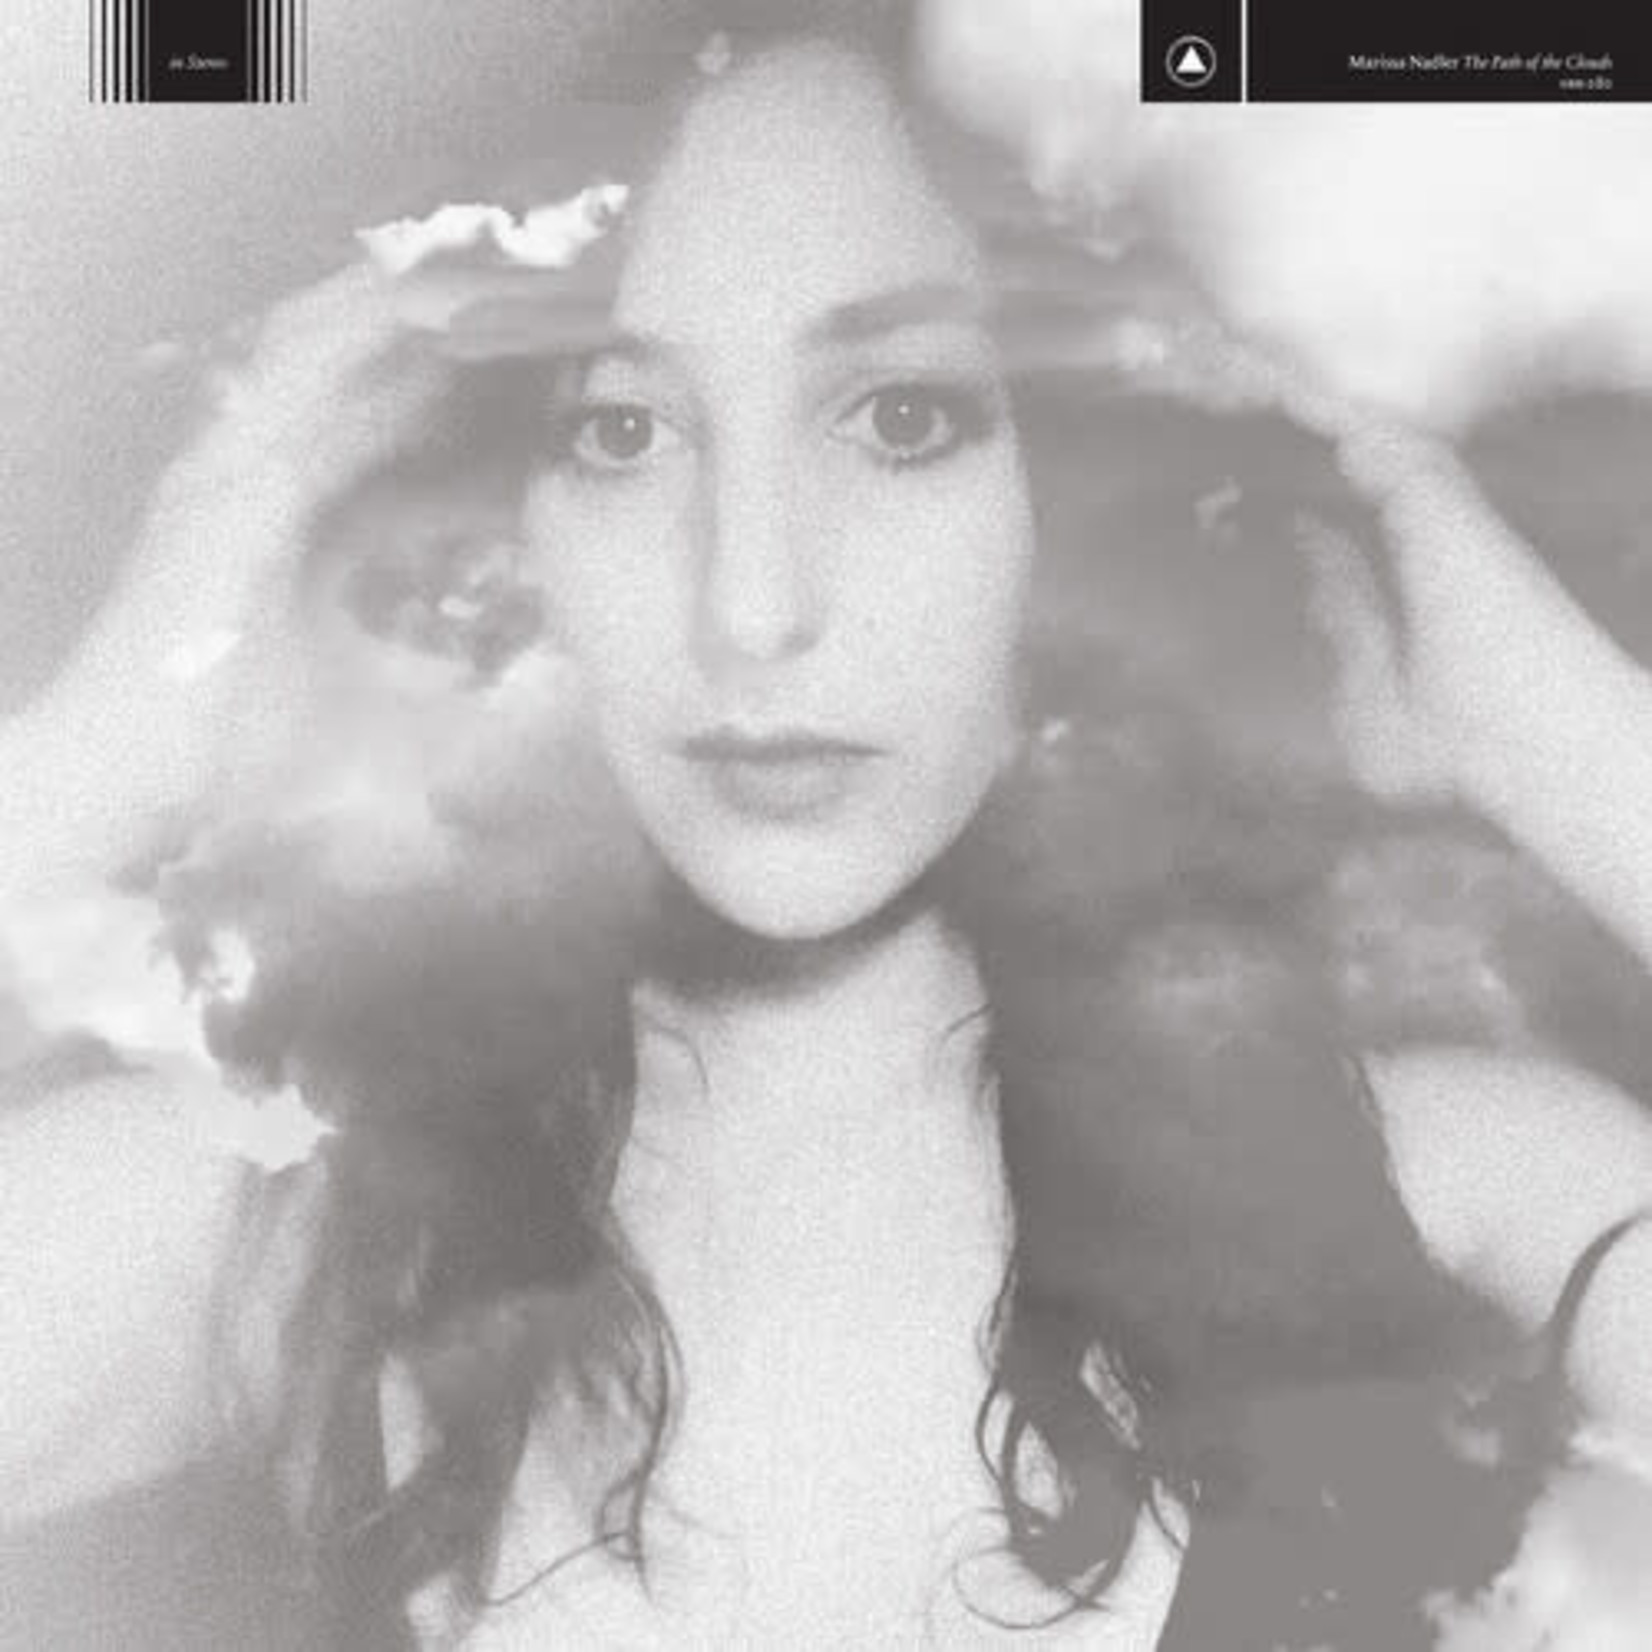 Sacred Bones Marissa Nadler - The Path of the Clouds (LP) [Silver]